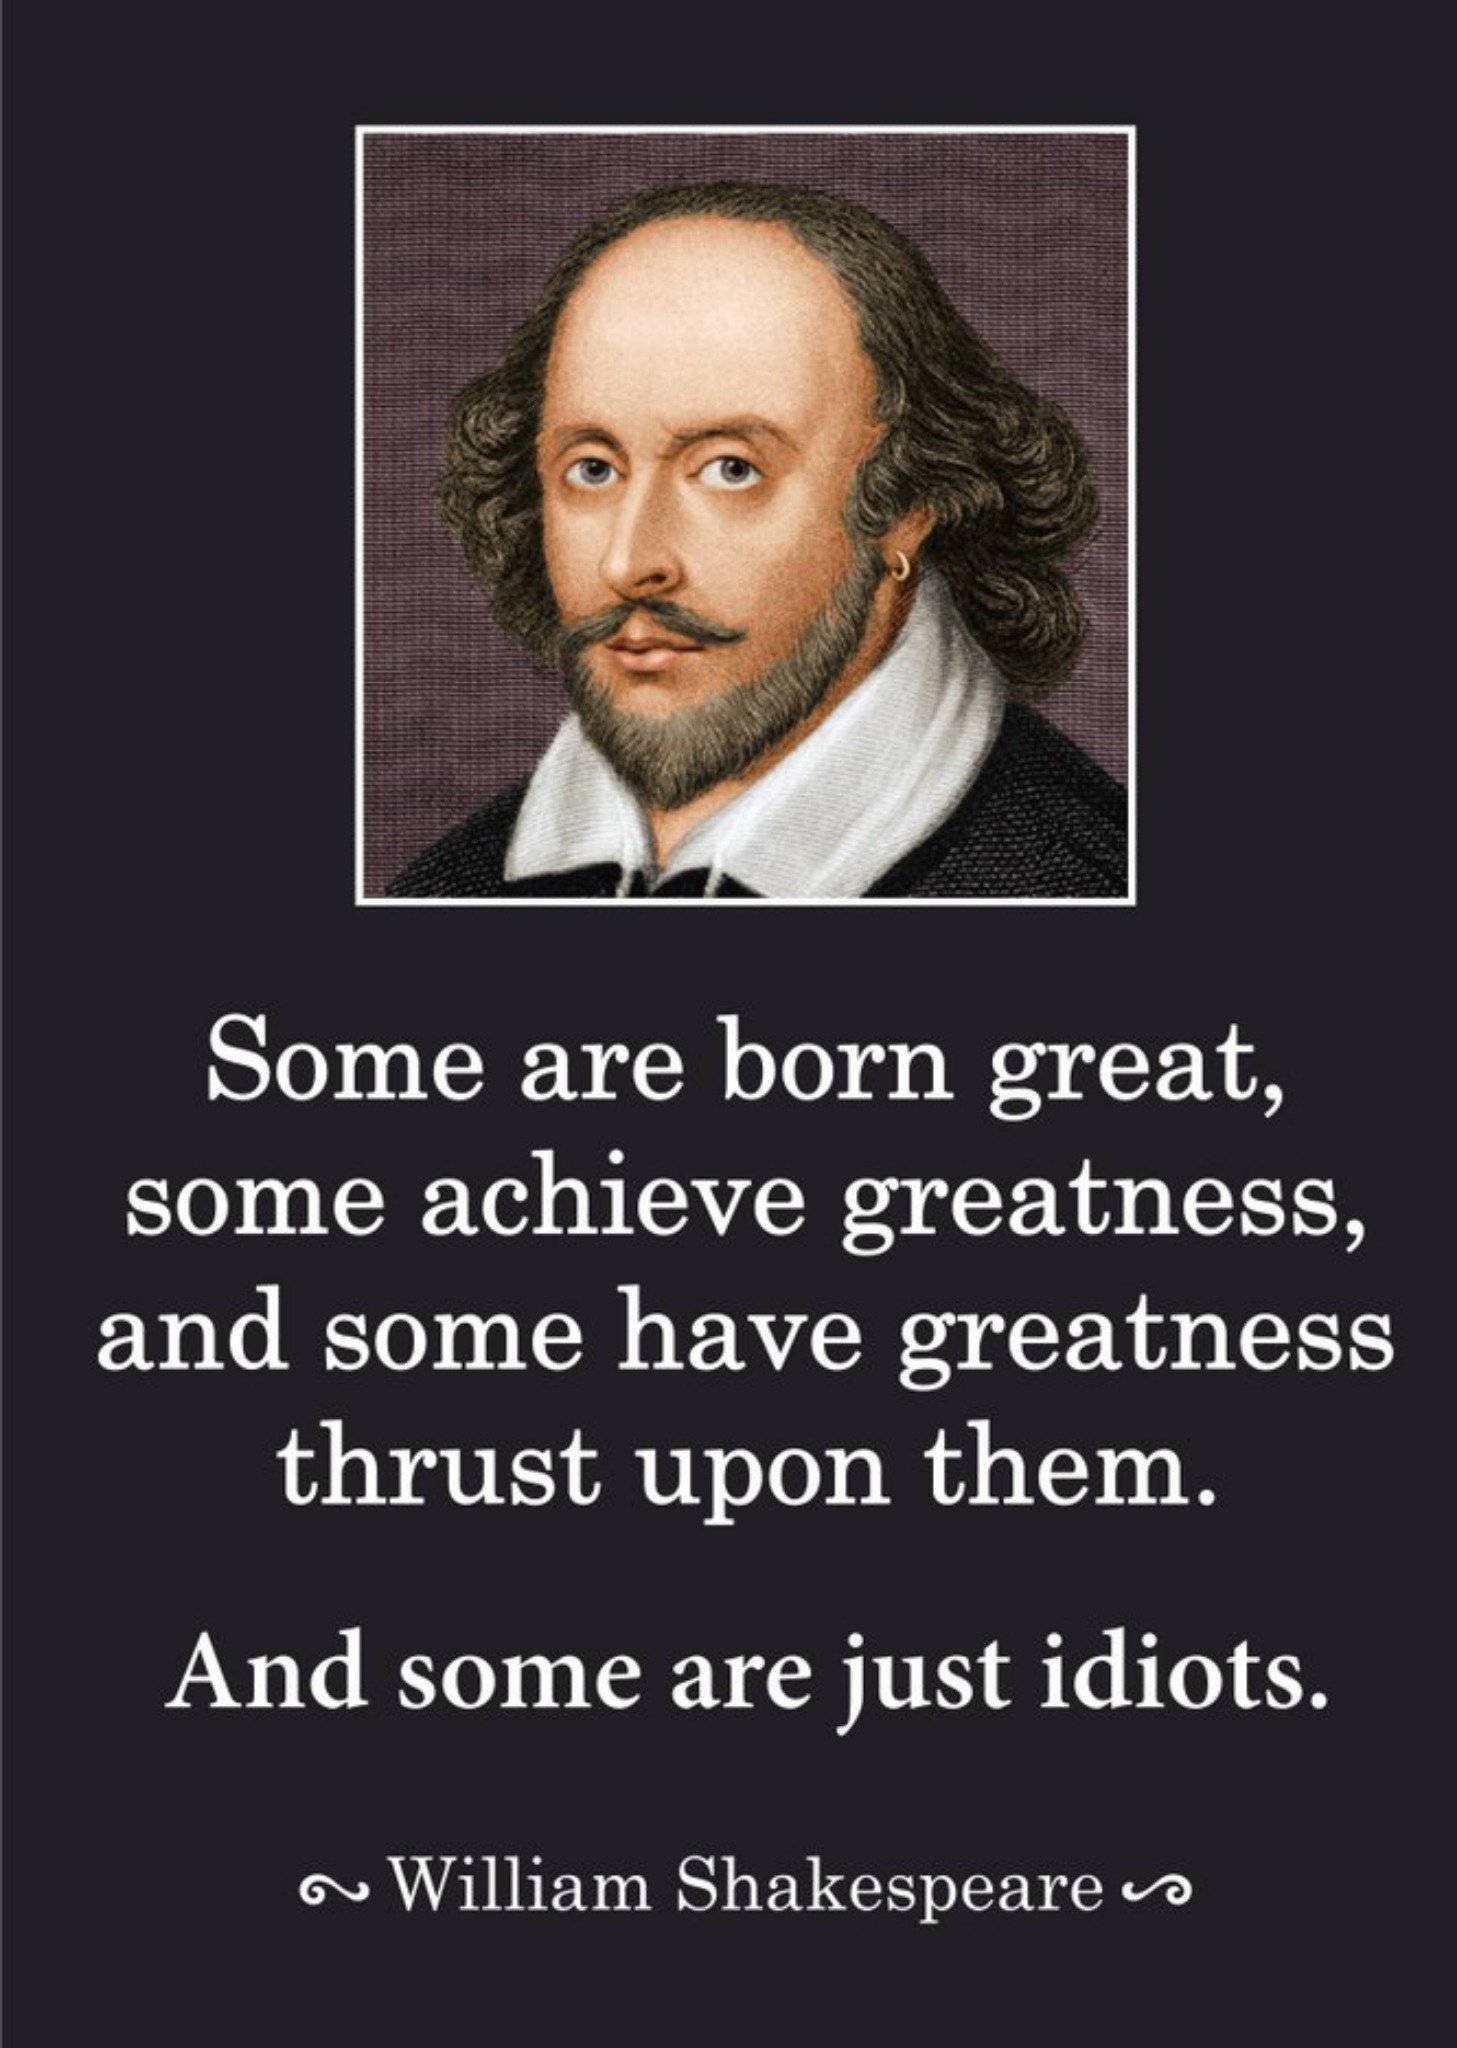 Moonpig Funny William Shakespeare Quote Birthday Card, Large